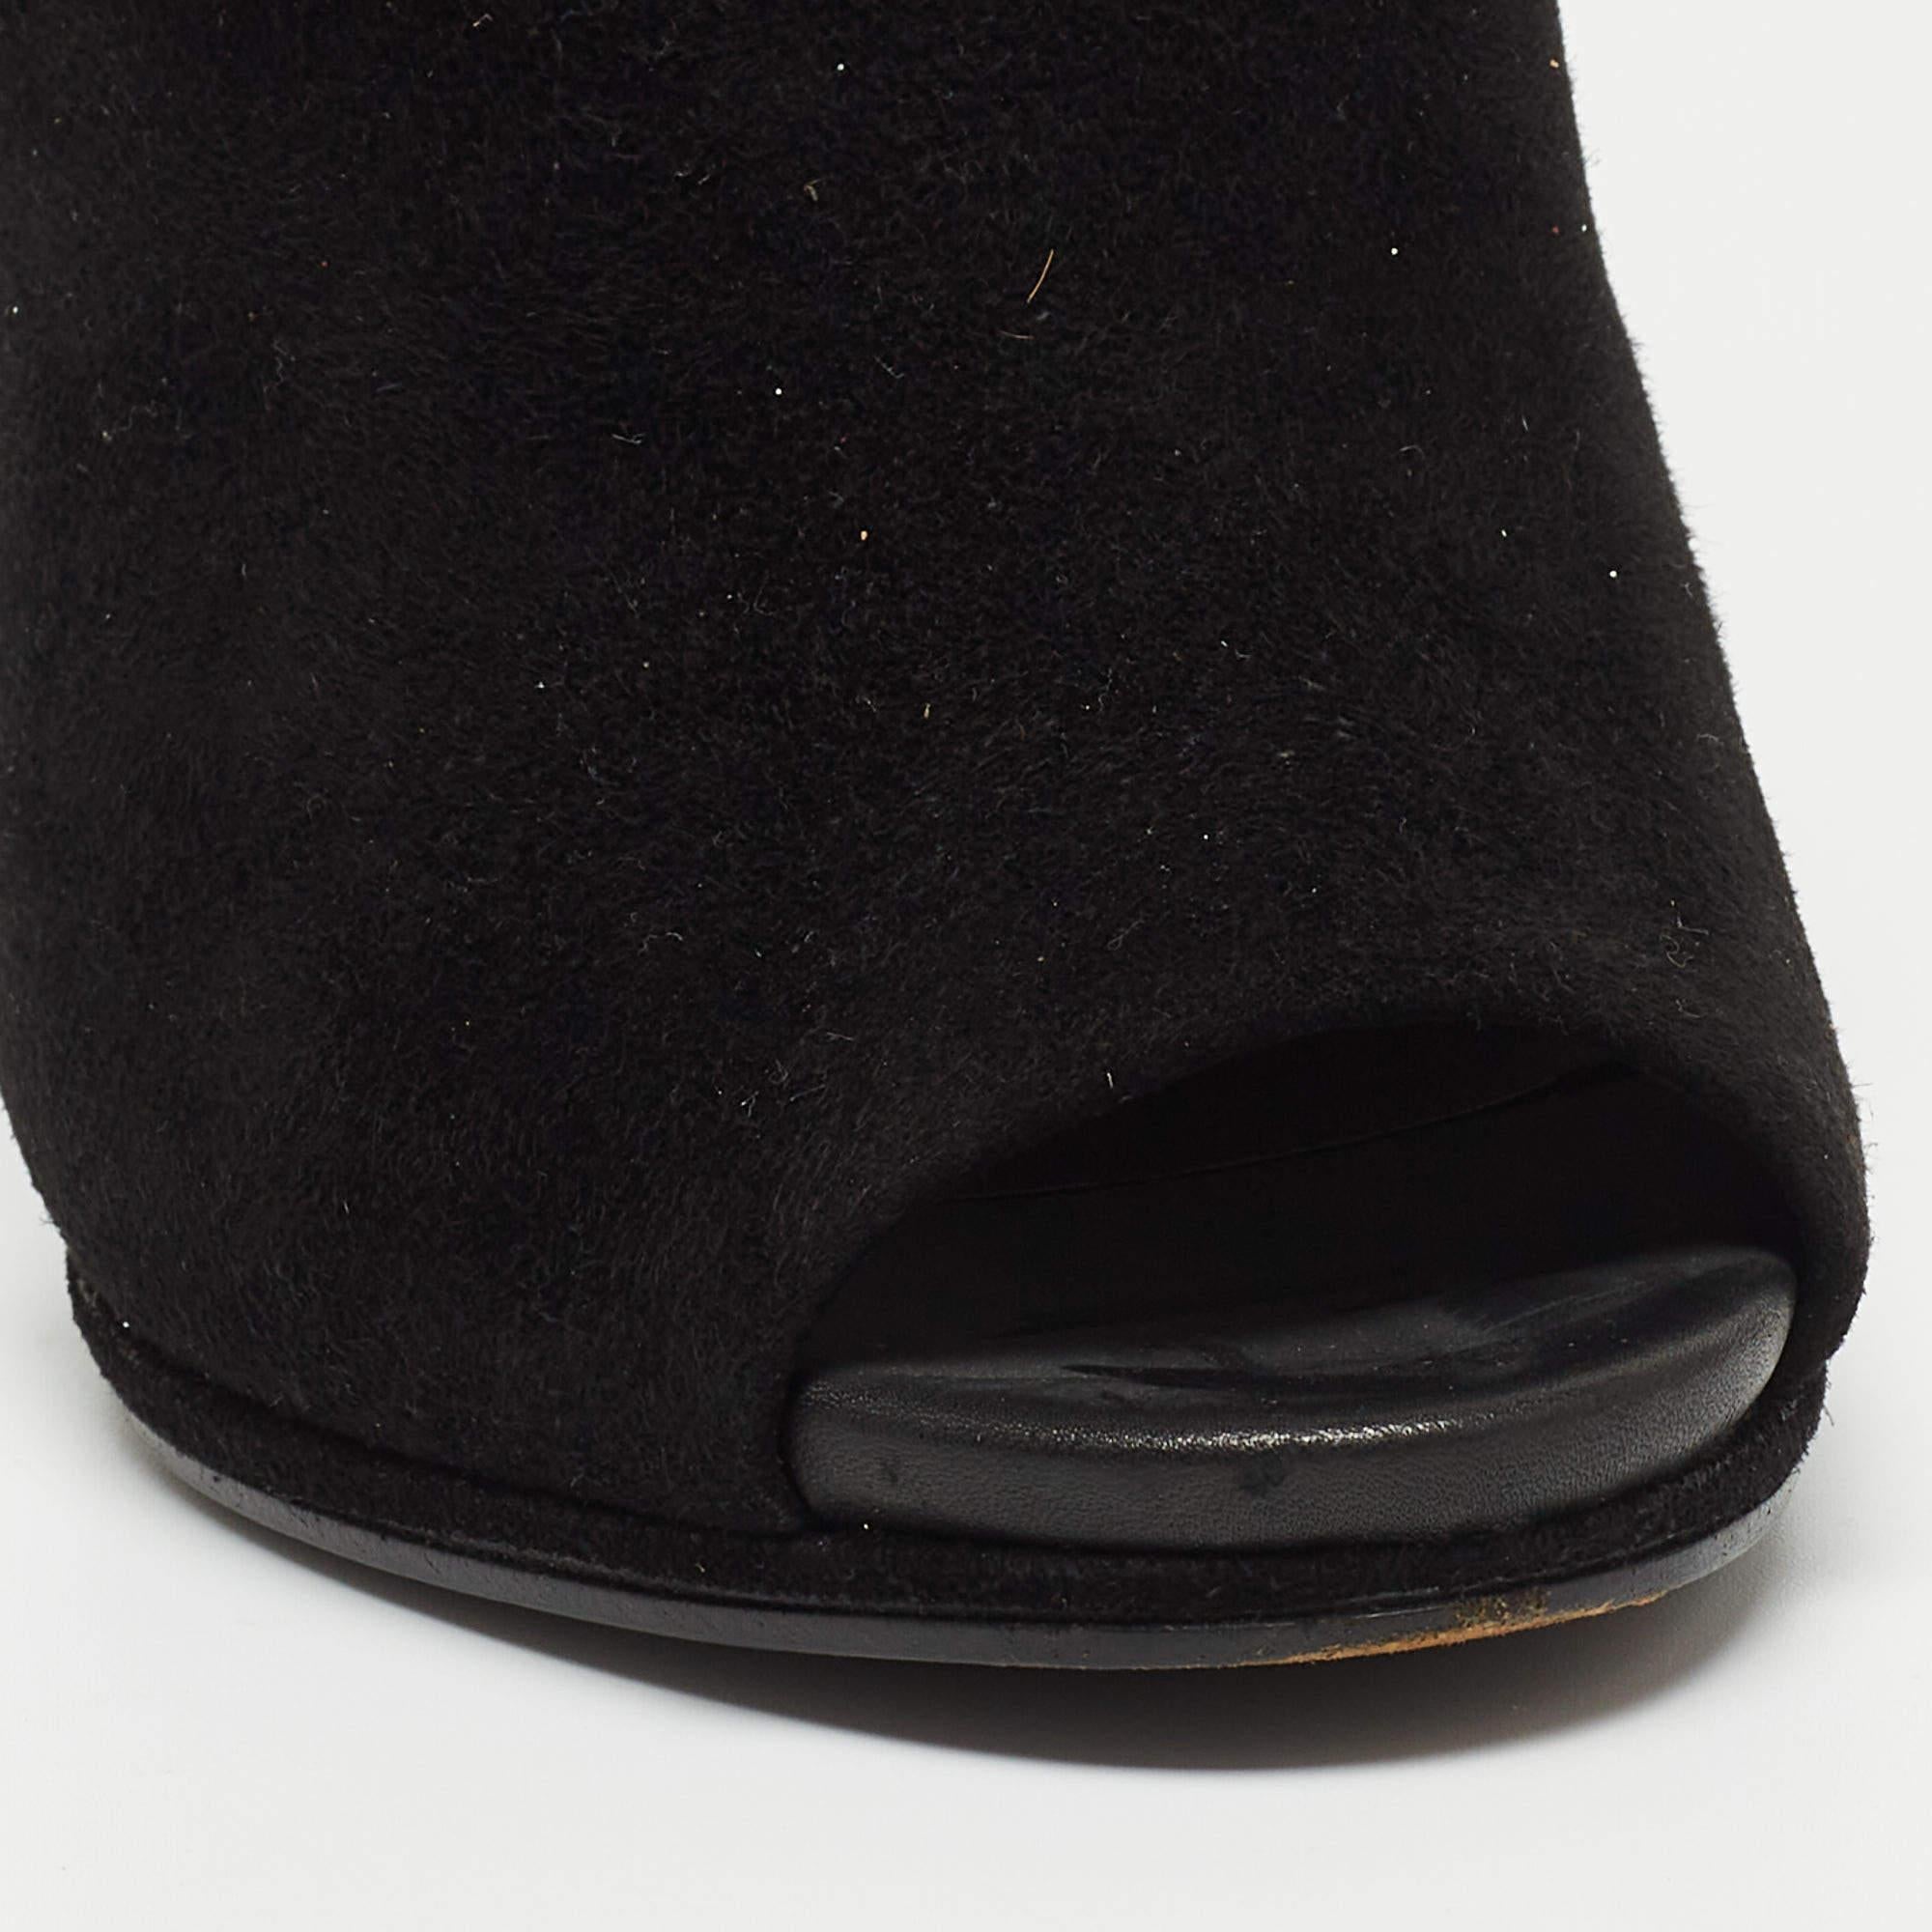 Gucci Black Suede Jane Peep Toe Booties Size 37.5 For Sale 3